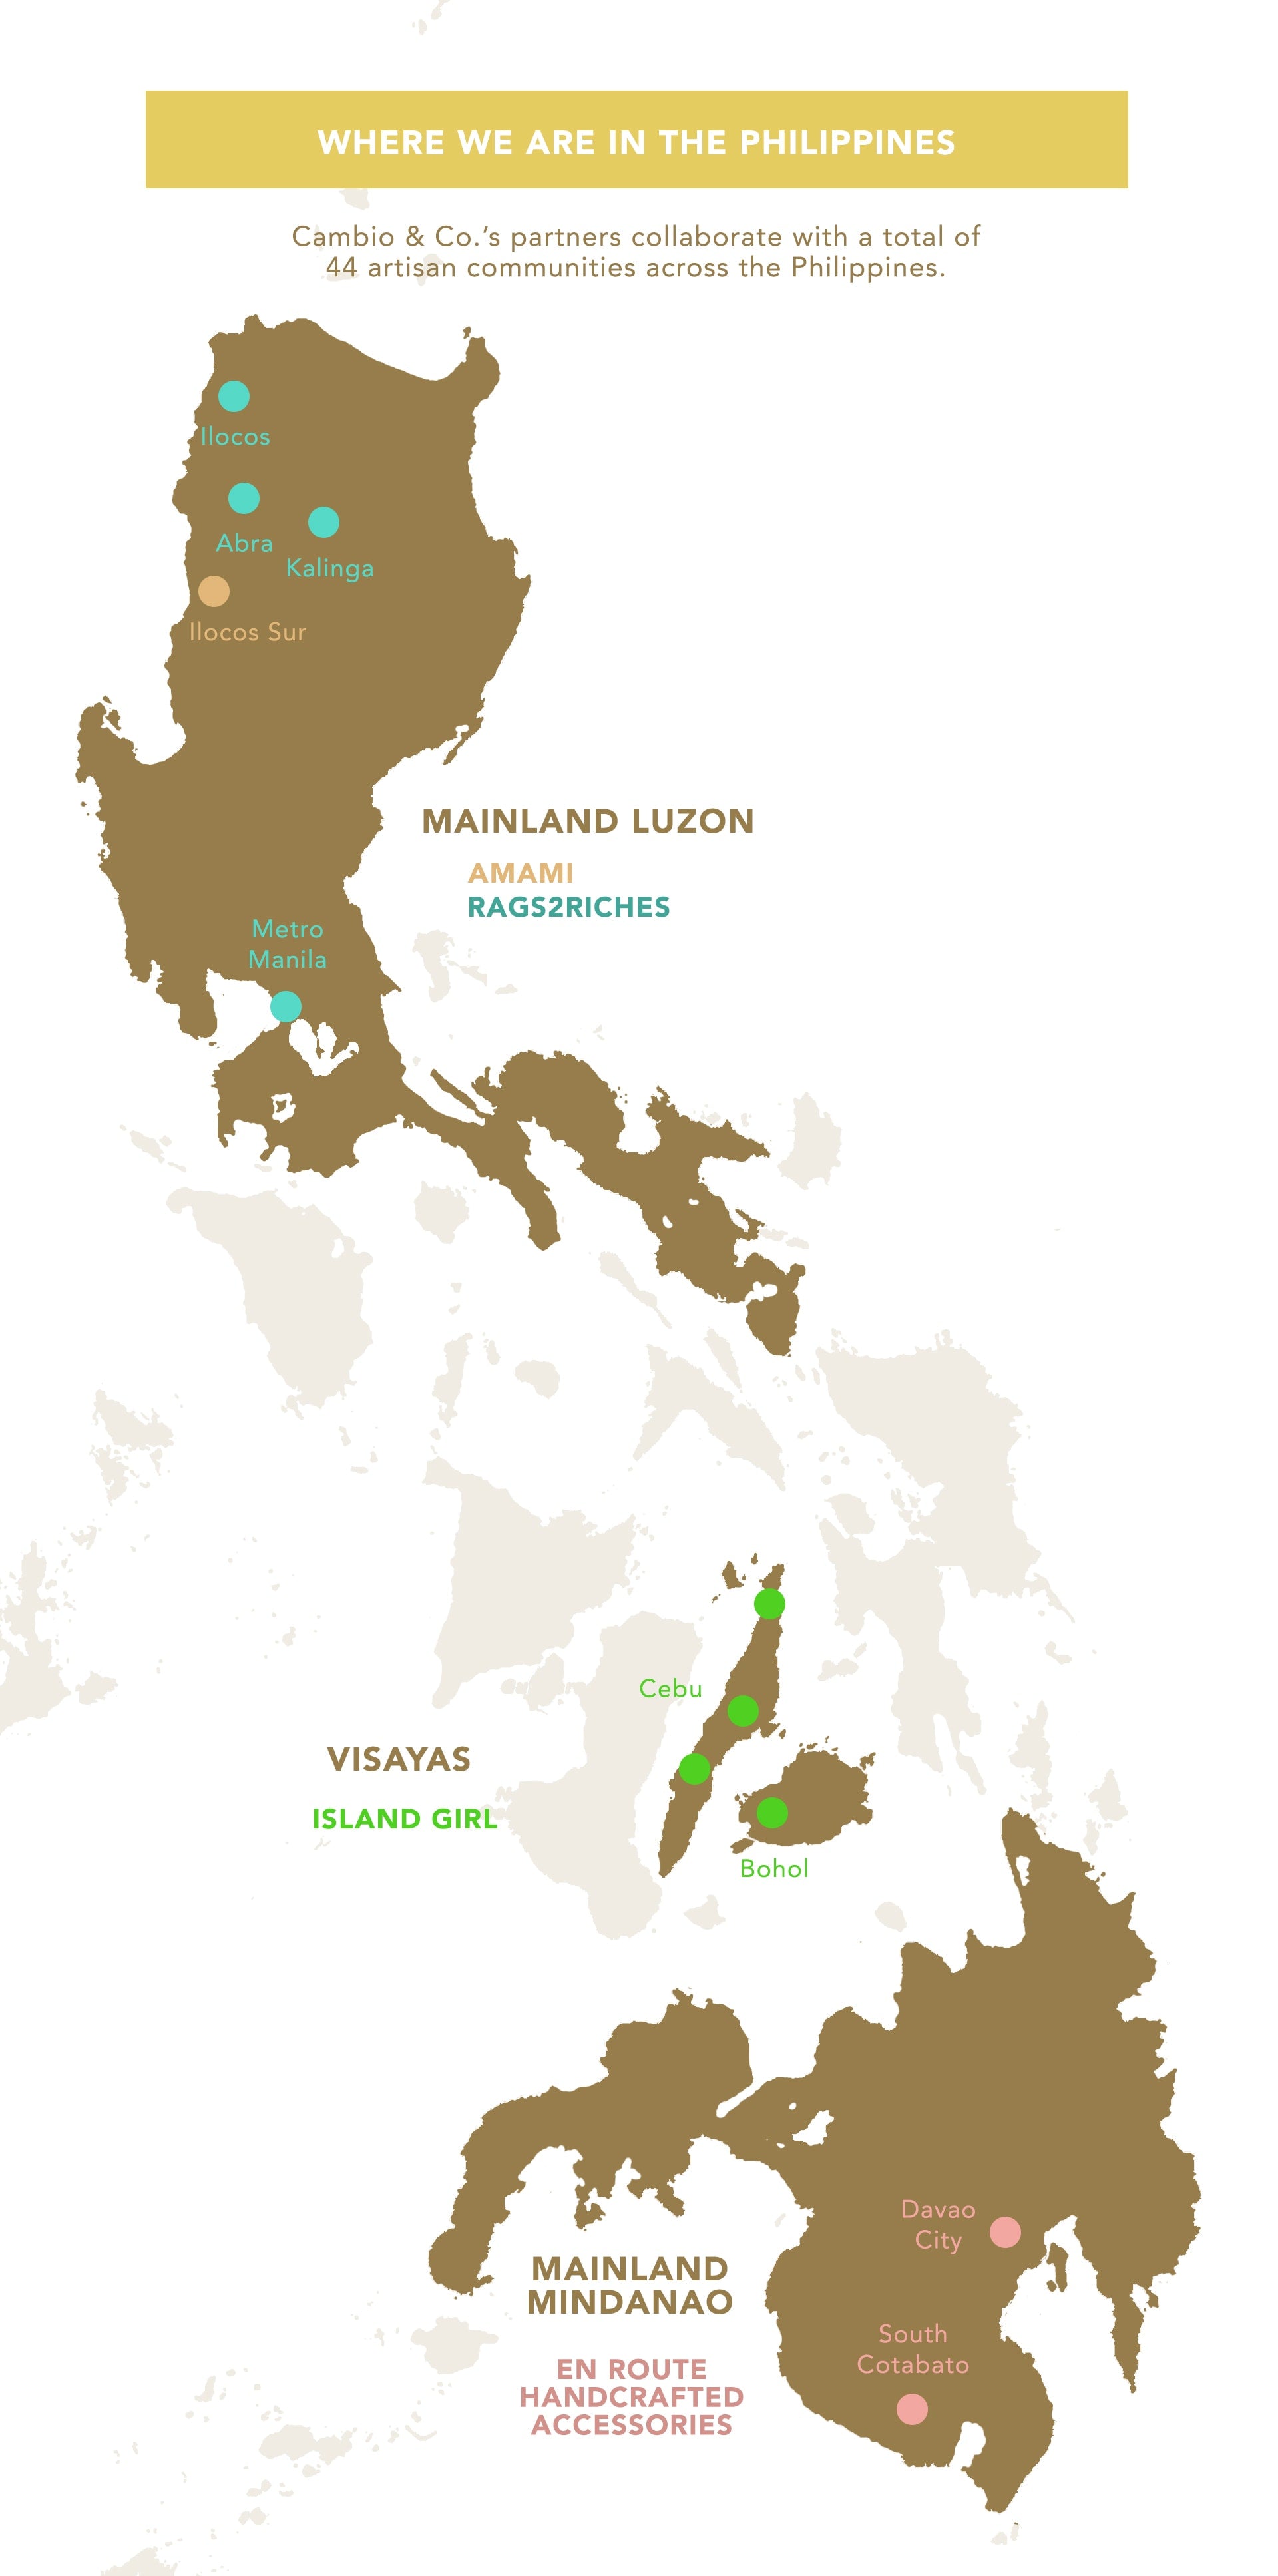 Social impact map of Cambio & Co. artisan communities across the Philippines in Luzon, Visayas, and Mindanao.